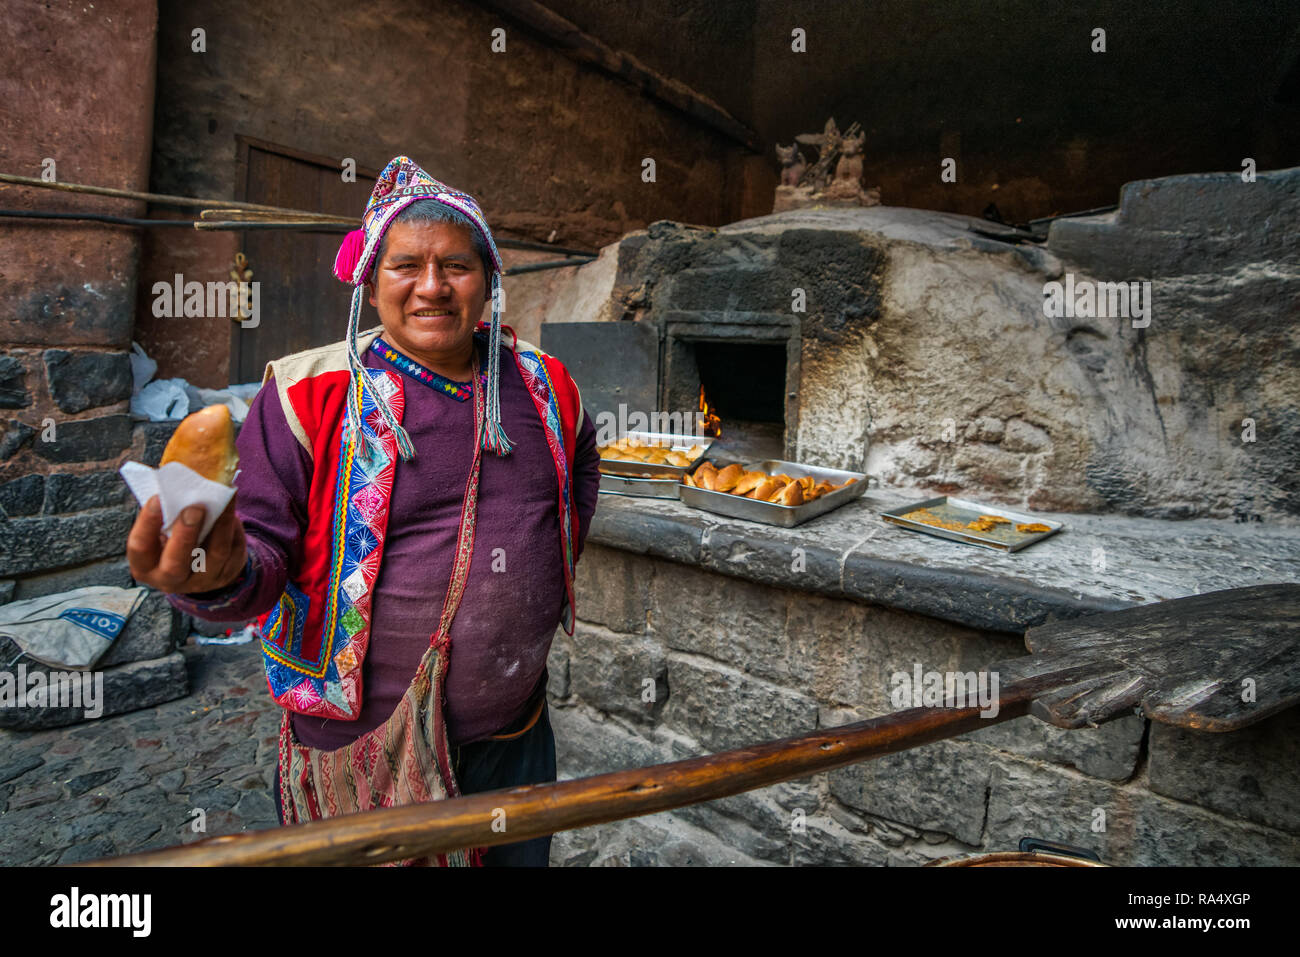 PISAC MARKET, PERU - SEPTEMBER 2018 : Man baker in traditional Peruvian cloth and hat, holding fresh baked empanada, standing near outdoor stone stove Stock Photo